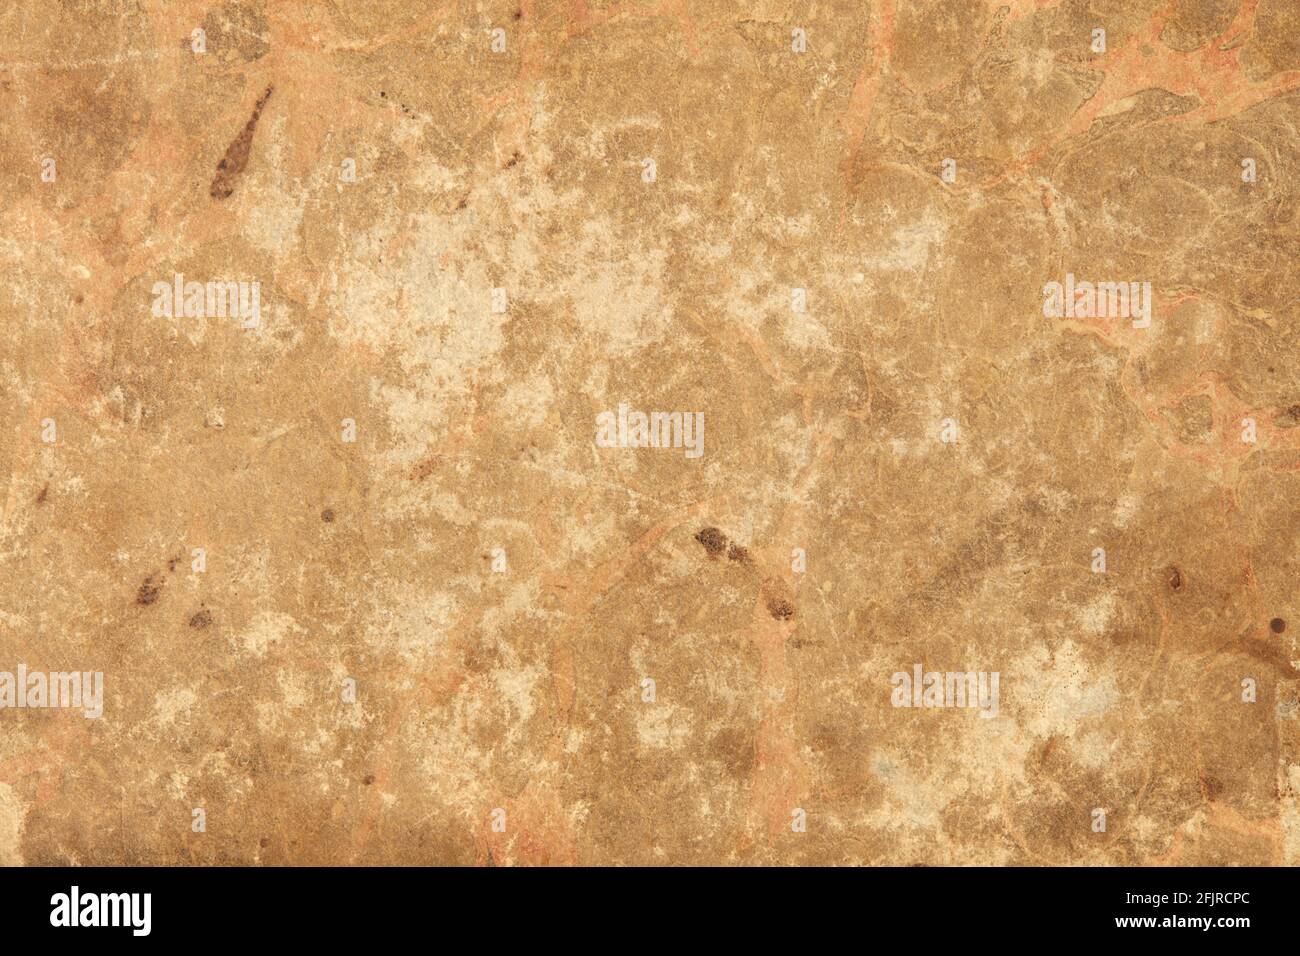 Old brown worn paper texture background Stock Photo